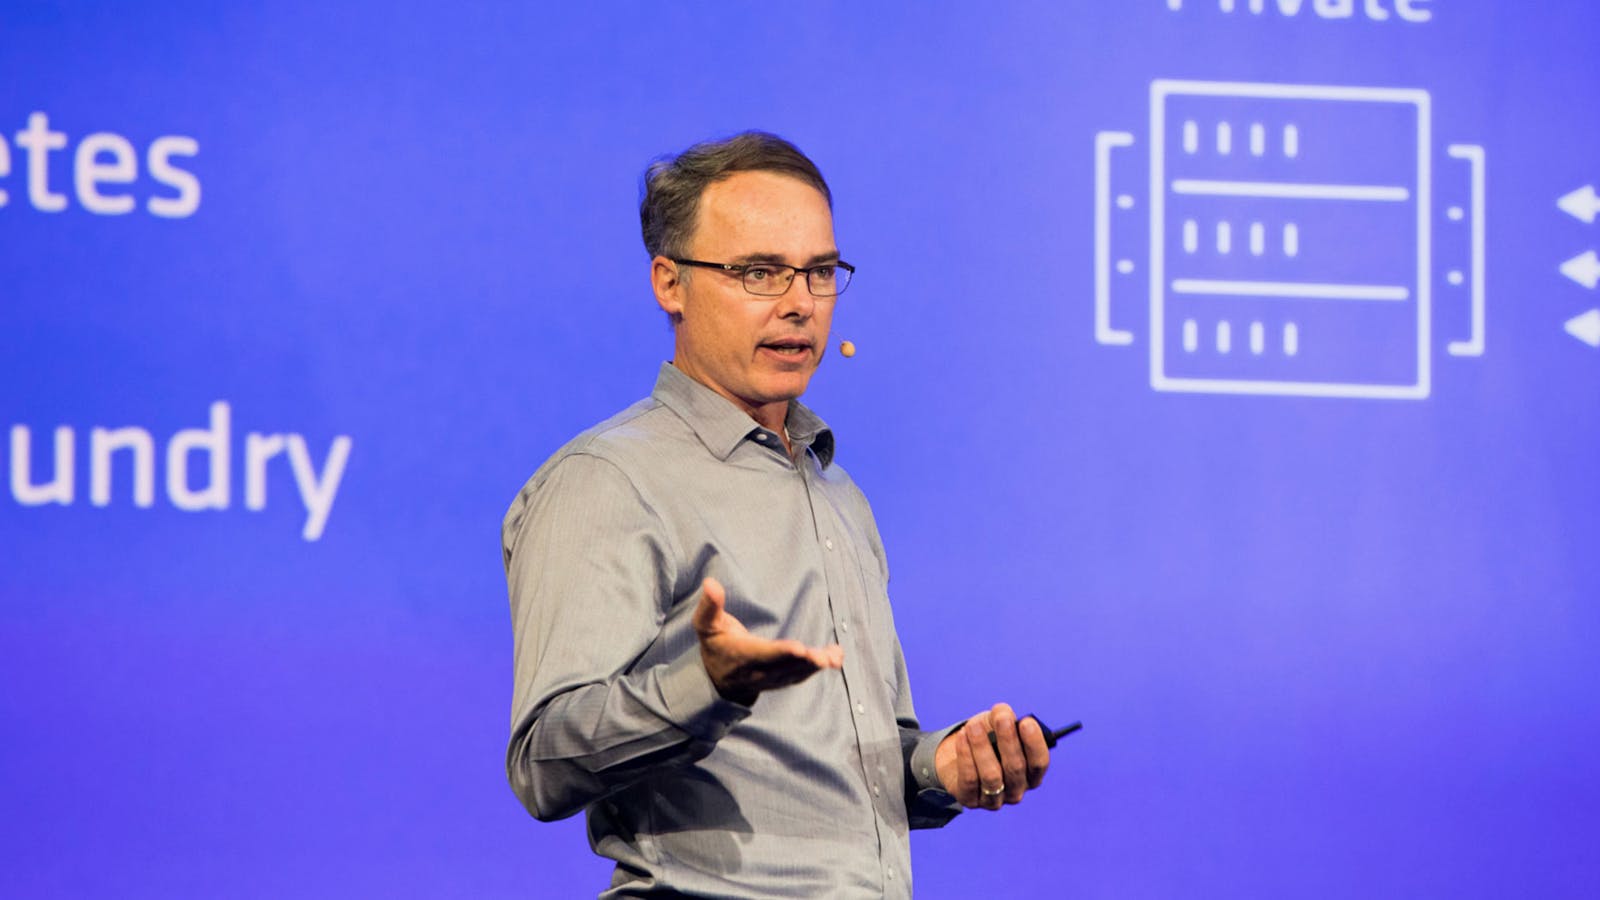 HashiCorp CEO Dave McJannet. Photo by HashiCorp